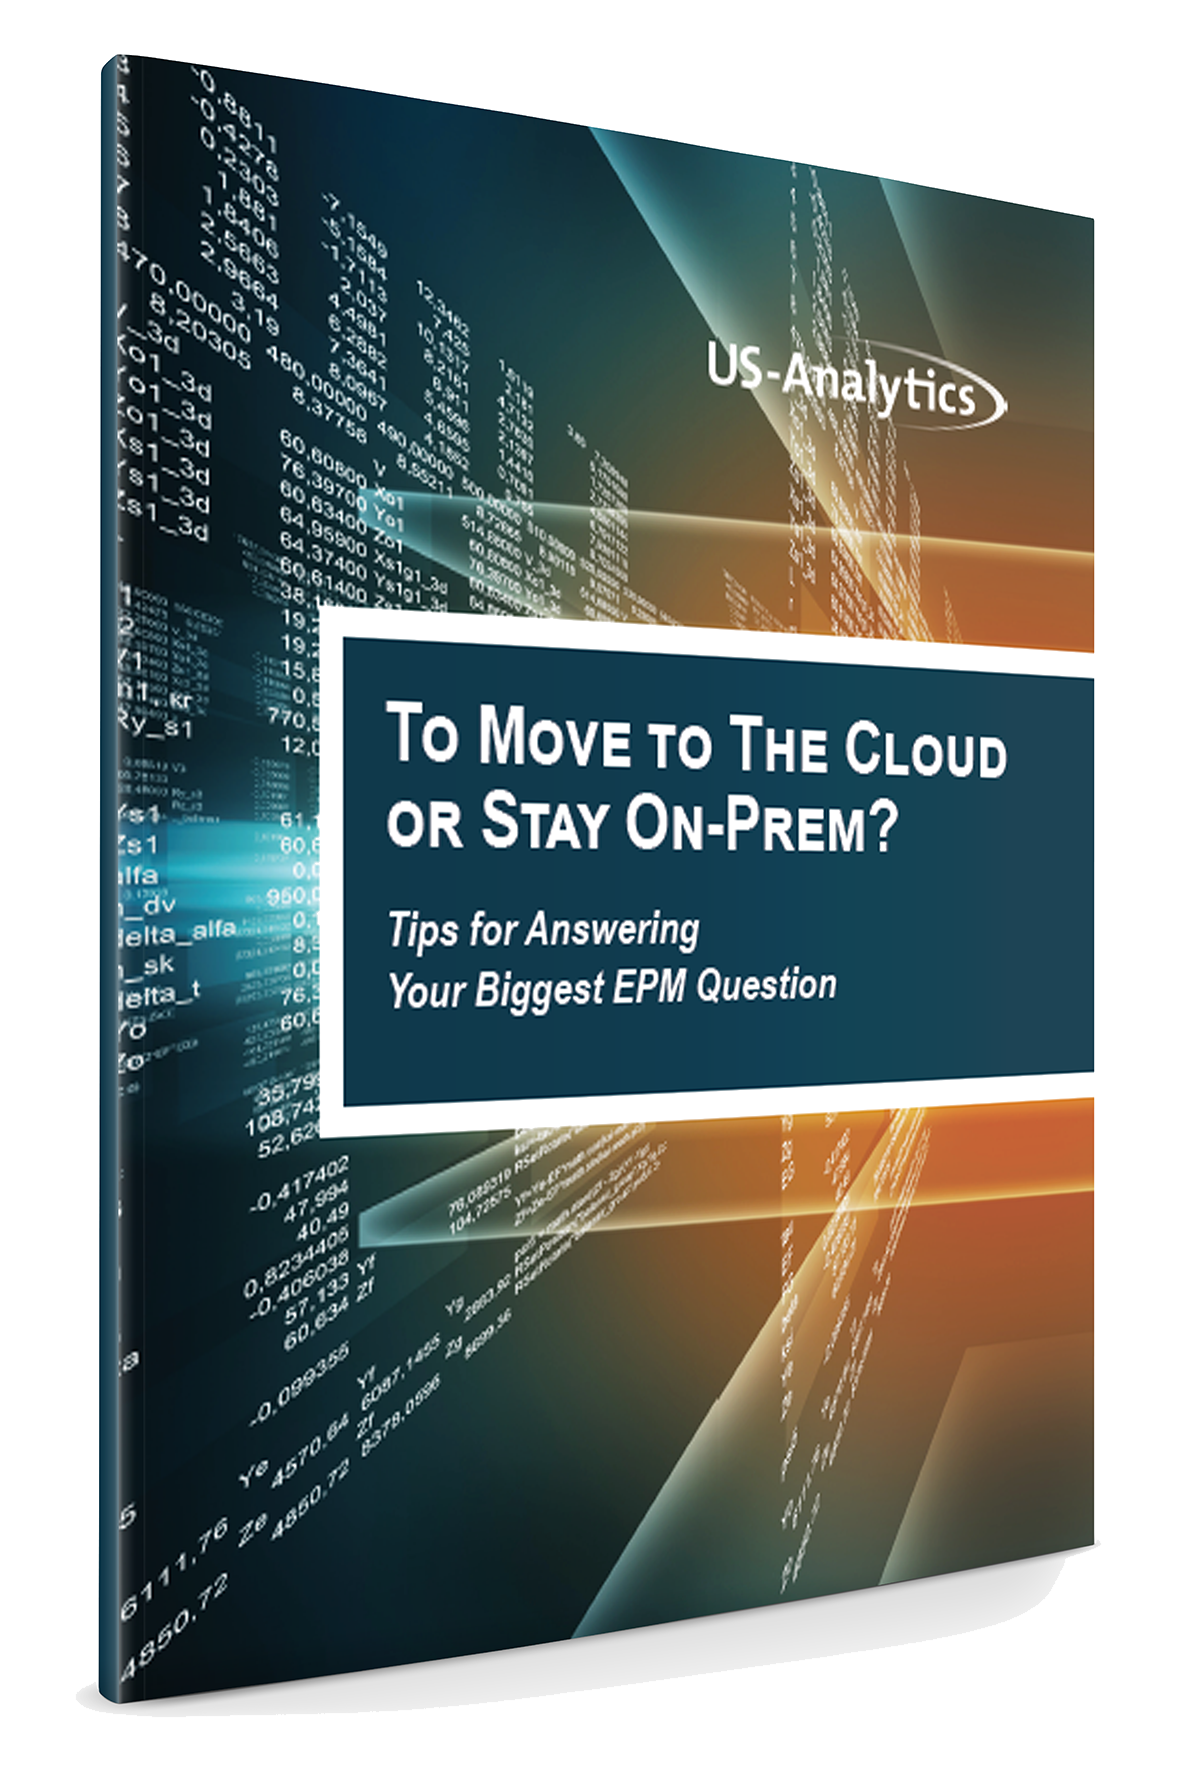 To Move to the Cloud or Stay On-Prem_landing page image-1